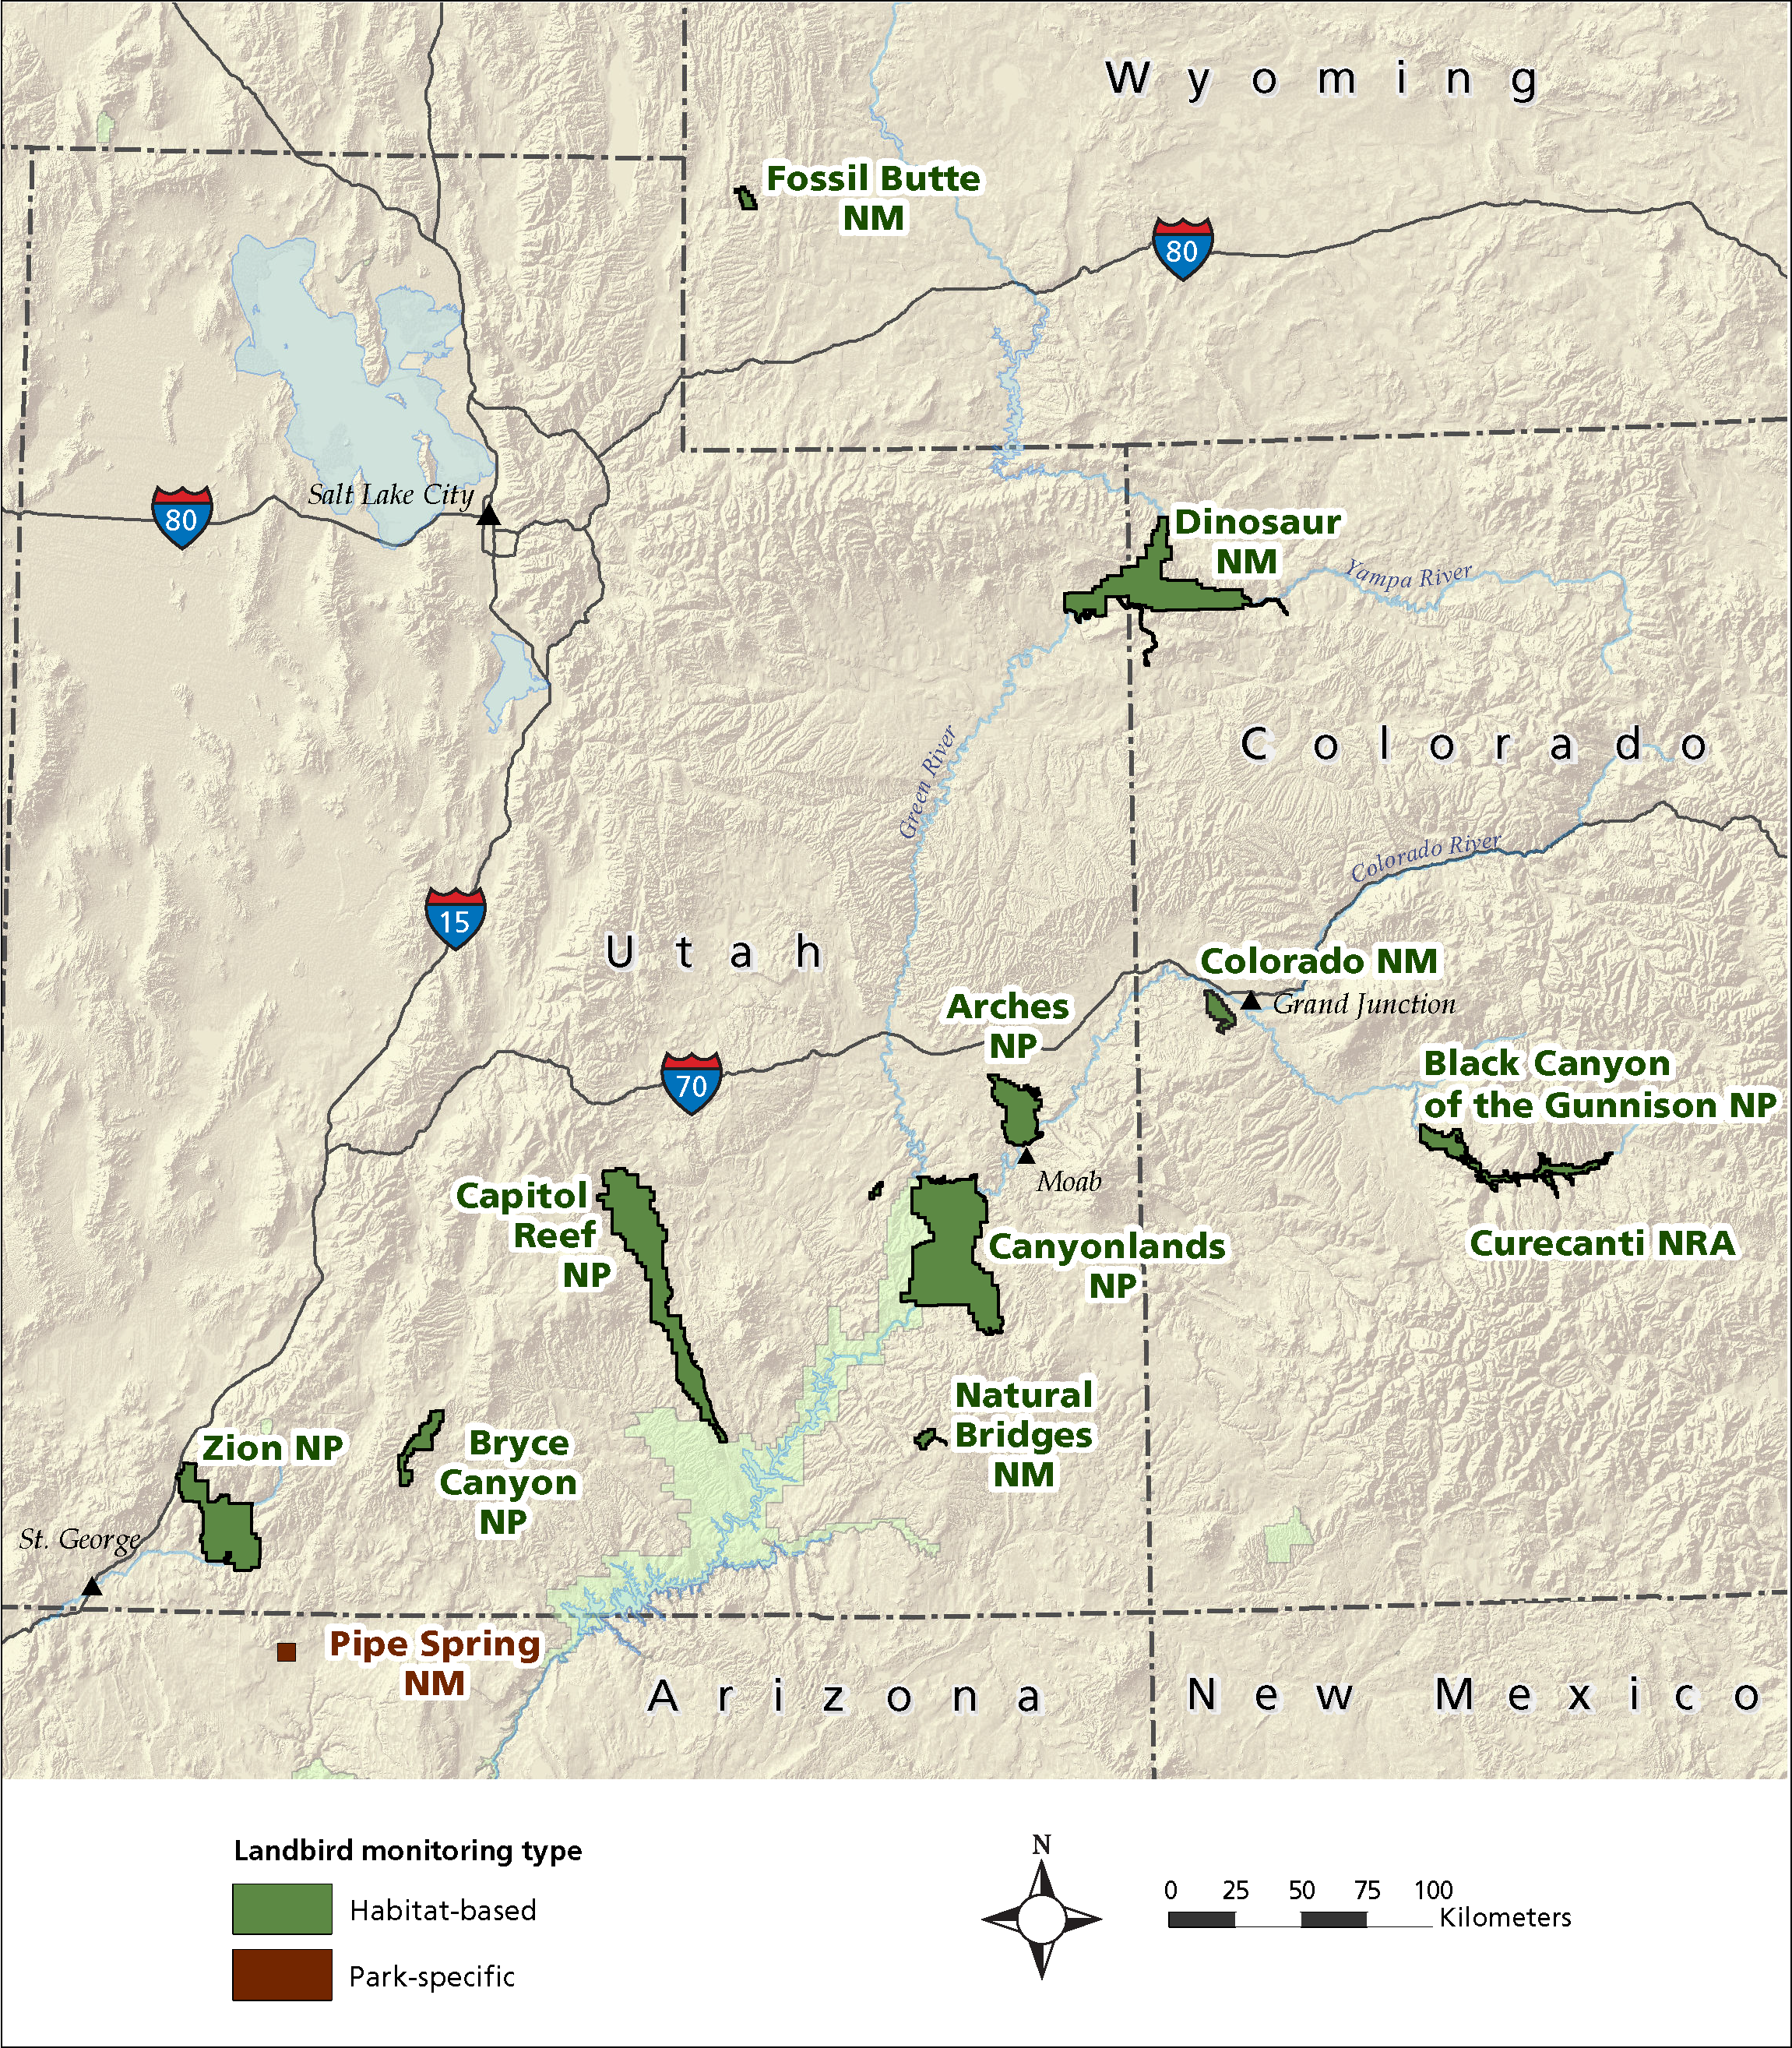 Map of NCPN parks where landbirds are monitored: Arches, Black Canyon of the Gunnison, Bryce Canyon, Canyonlands, Capitol Reef, and Zion national parks; Curecanti National Recreation Area, and Dinosaur, Fossil Butte, and Natural Bridges national monuments.